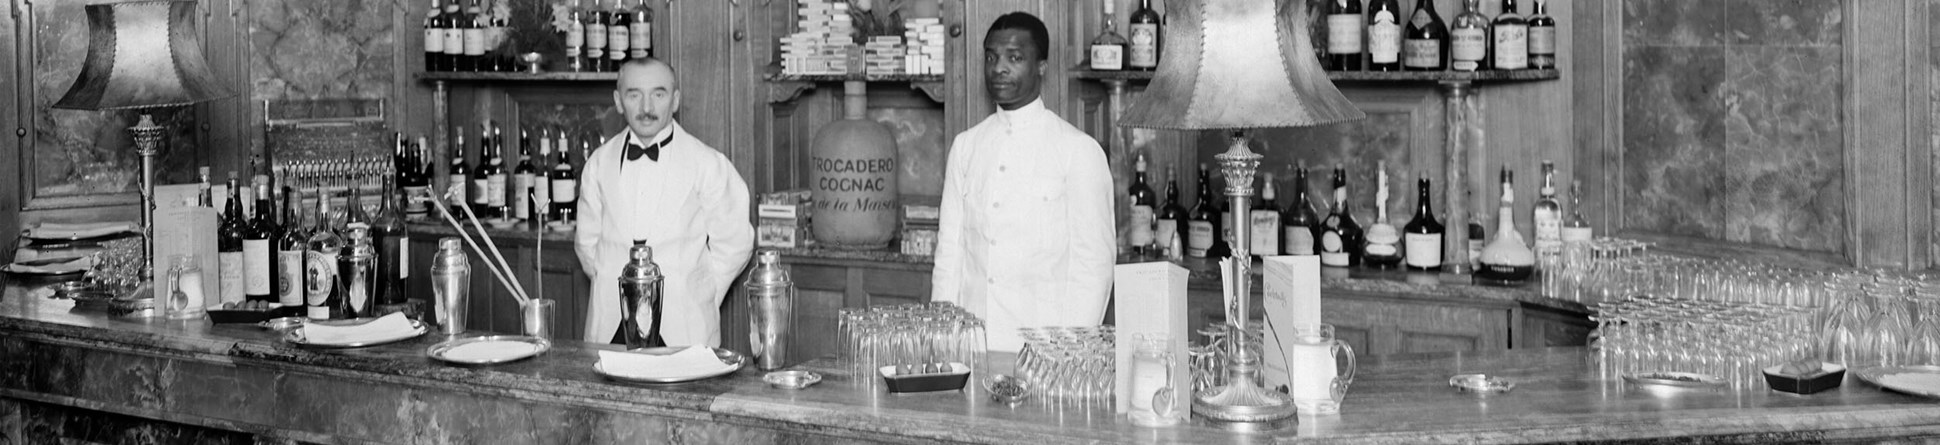 Image of the Long Bar at the Trocadero, Piccadilly. A male only preserve, popular with middle class gay men during the 1920s and 1930s